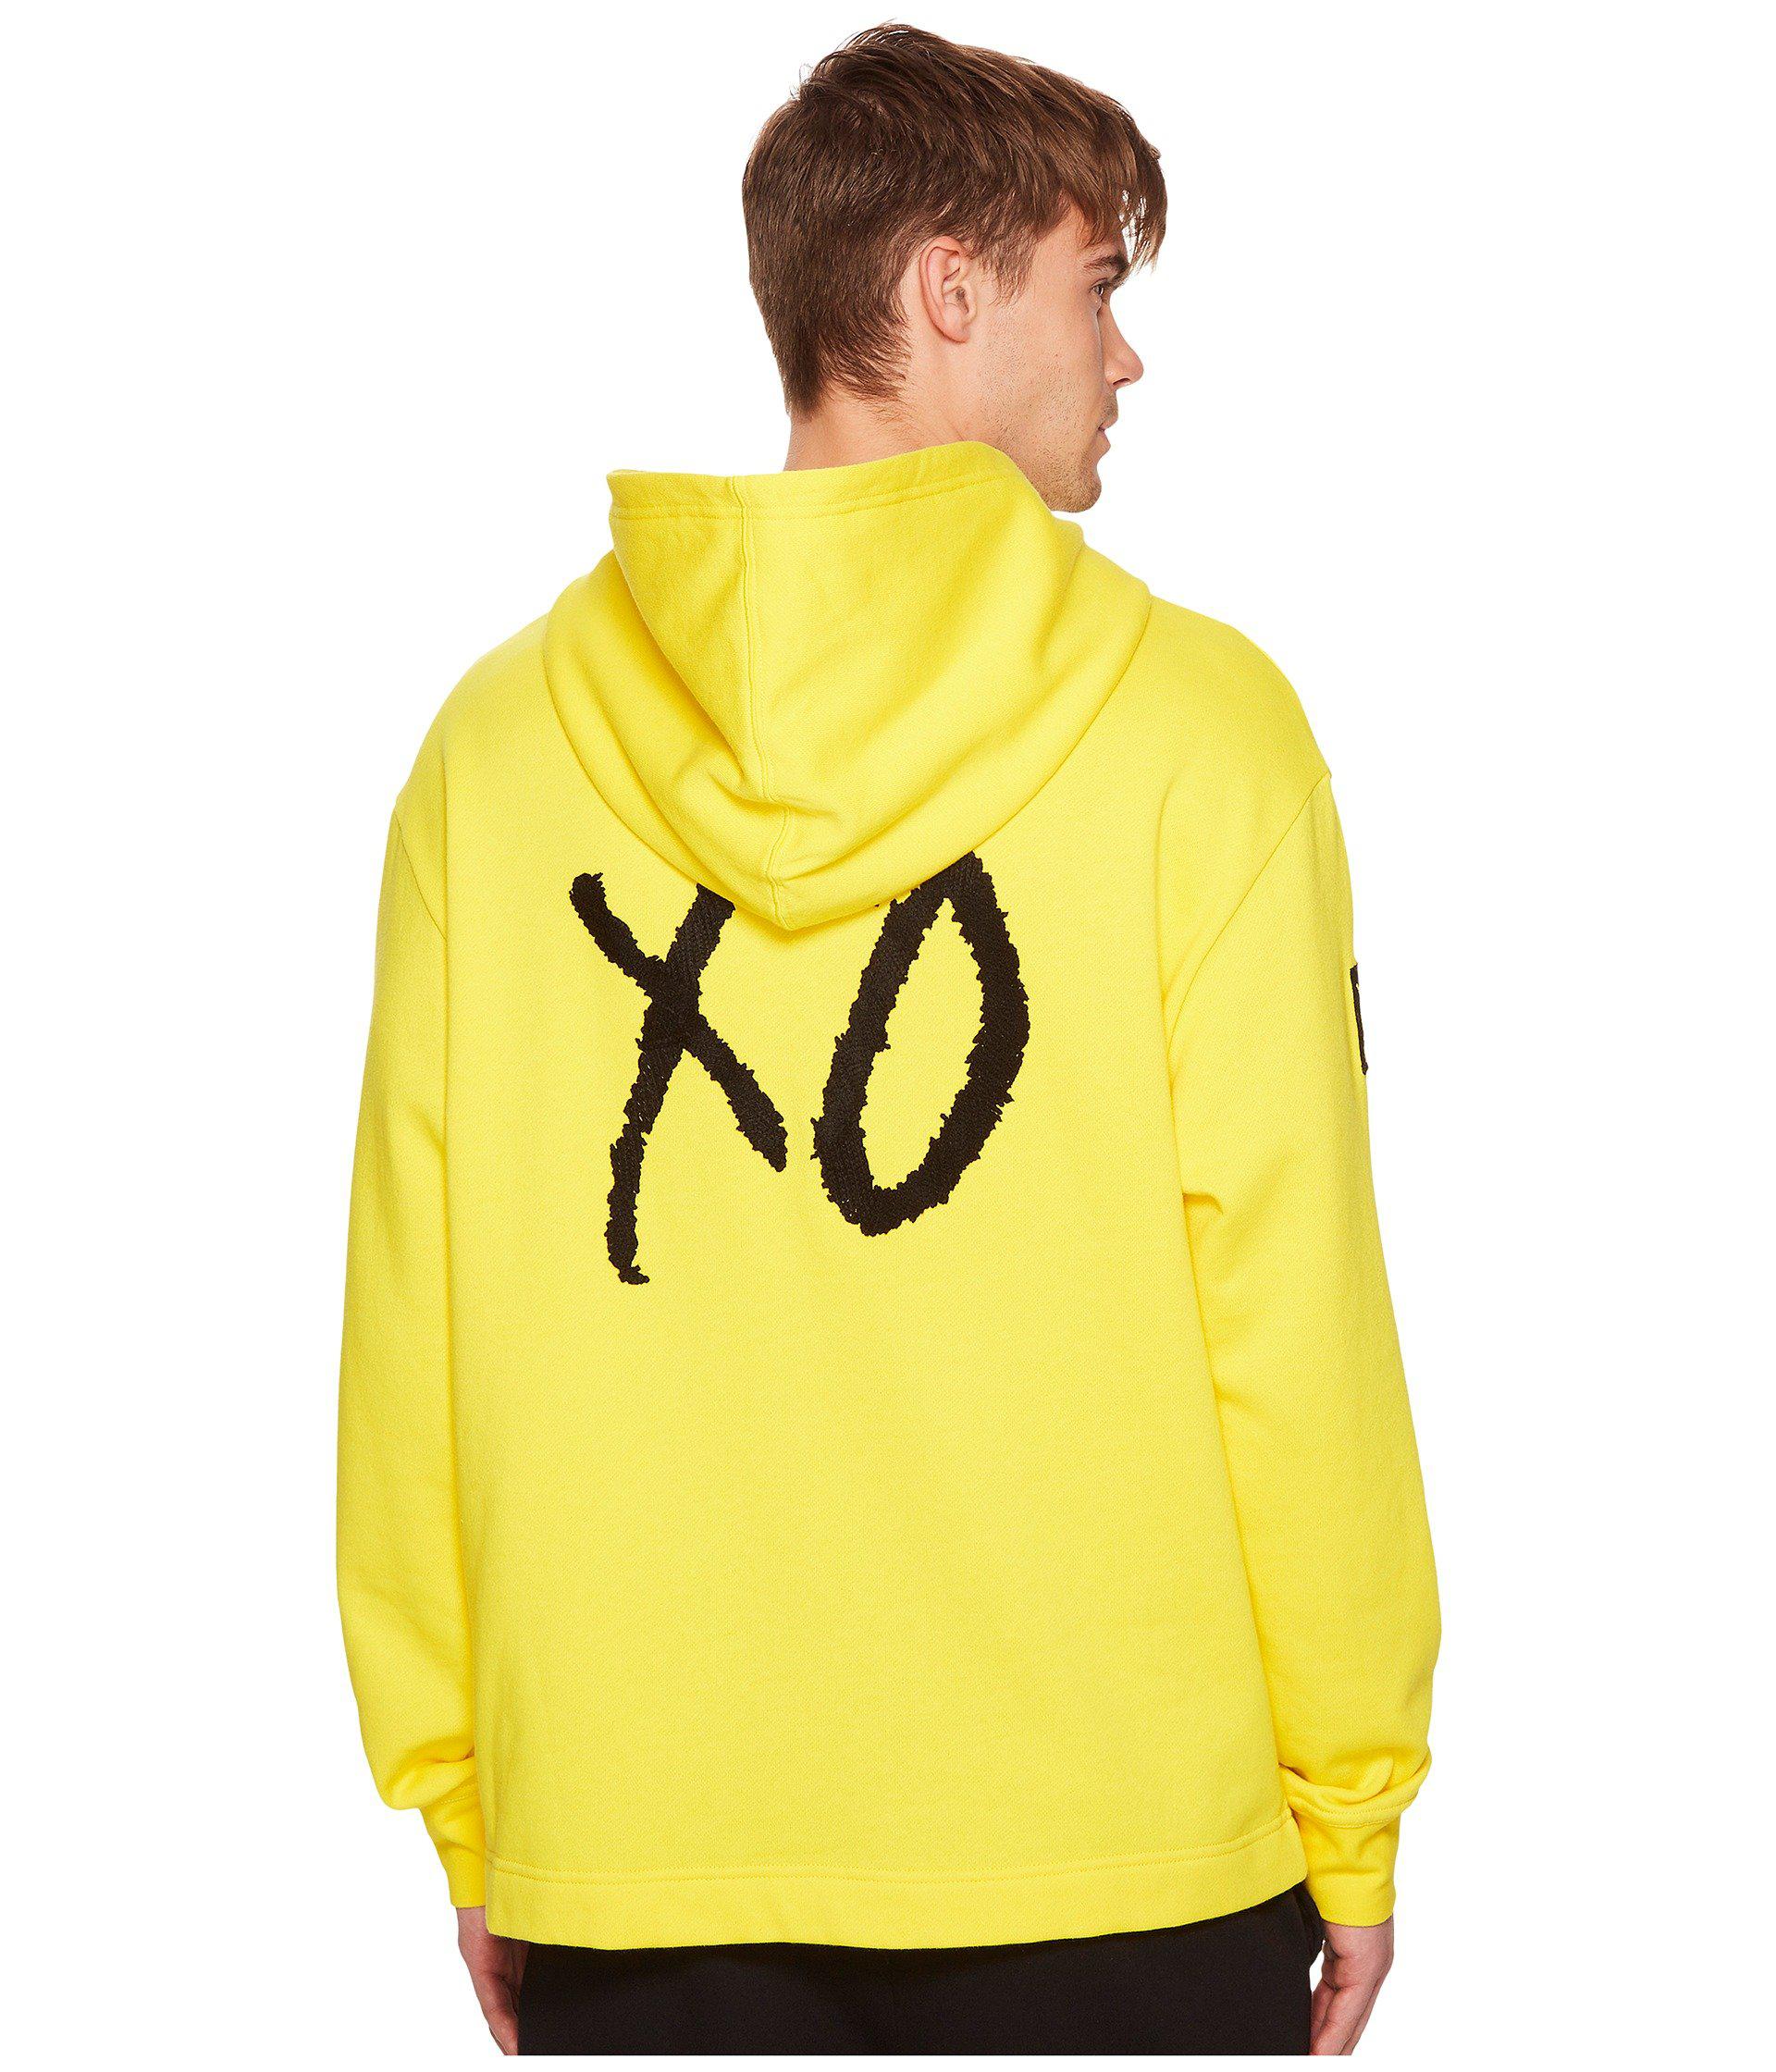 PUMA Cotton X Xo By The Weeknd Oversized Hoodie in Yellow for Men - Lyst